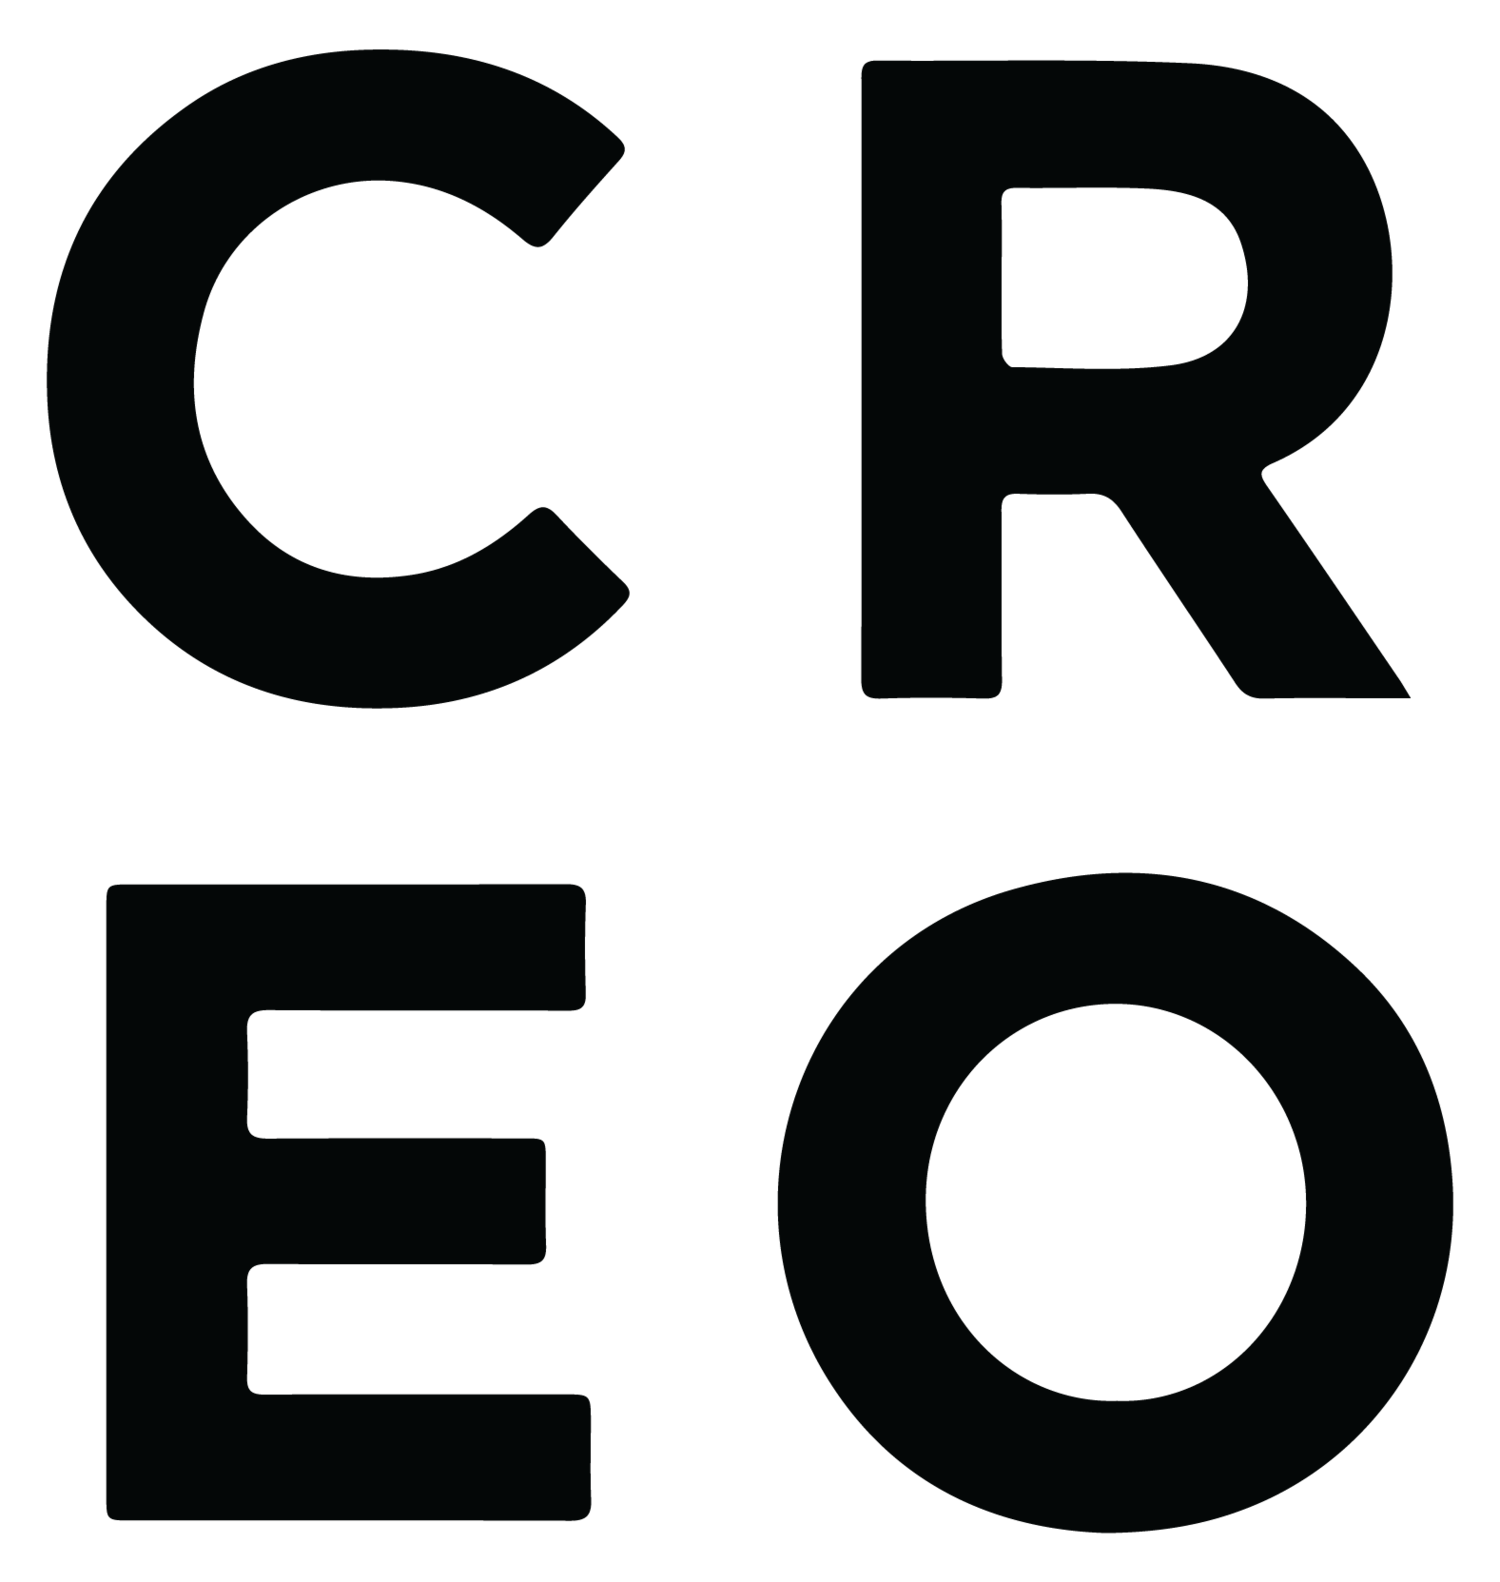 PTC Creo RELEASED: Apps, Pricing and More